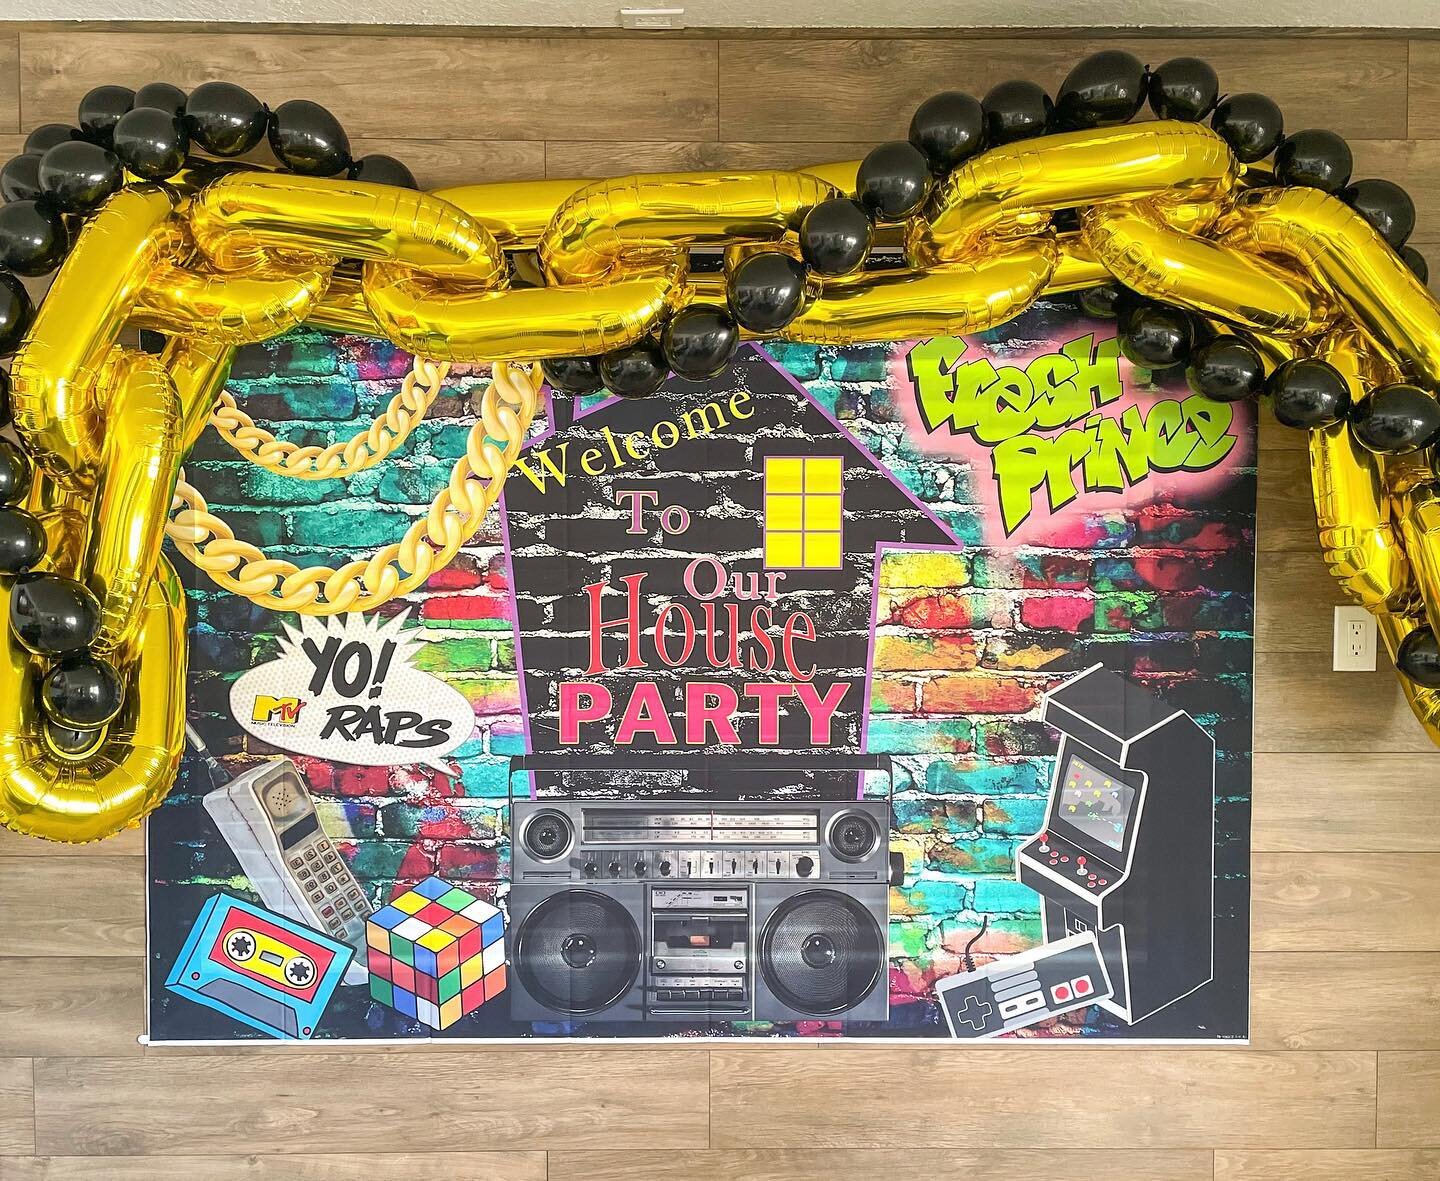 WHAT&rsquo;S YOUR FAVORITE THEME?! 
There are just some themes you don&rsquo;t see that often and we love it! The creative juices are flowing and we enjoy making your ideas become a reality! This is why we pride ourselves on customizing your party de